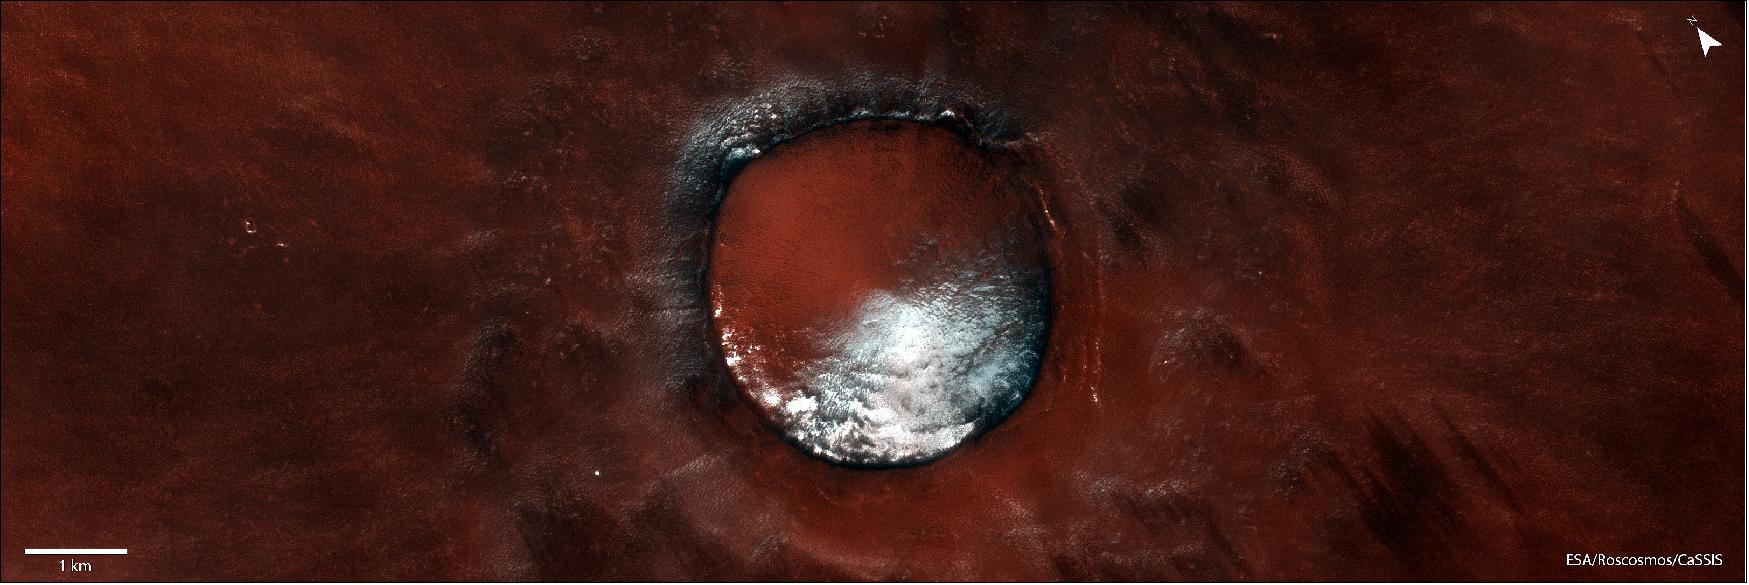 Figure 12: This delightful image was taken 5 July 2021 and soaks in the view of a 4 km-wide crater in Mars’ north polar region of Vastitas Borealis, centered at 70.6 ºN/230.3ºE. - The crater is partially filled with water ice, which is also particularly predominant on its north-facing slopes that receive fewer hours of sunlight on average throughout the year. The dark material clearly visible on the crater rim – giving it a somewhat scorched appearance – likely consists of volcanic materials such as basalt. - Most of the surrounding terrain is ice free, but has been shaped by ongoing aeolian processes. The streaks at the bottom right of the image are formed by winds that have removed the brighter iron oxide dust from the surface, exposing a slightly darker underlying substrate (image credit: ESA/Roscosmos/CaSSIS, CC BY-SA 3.0 IGO)